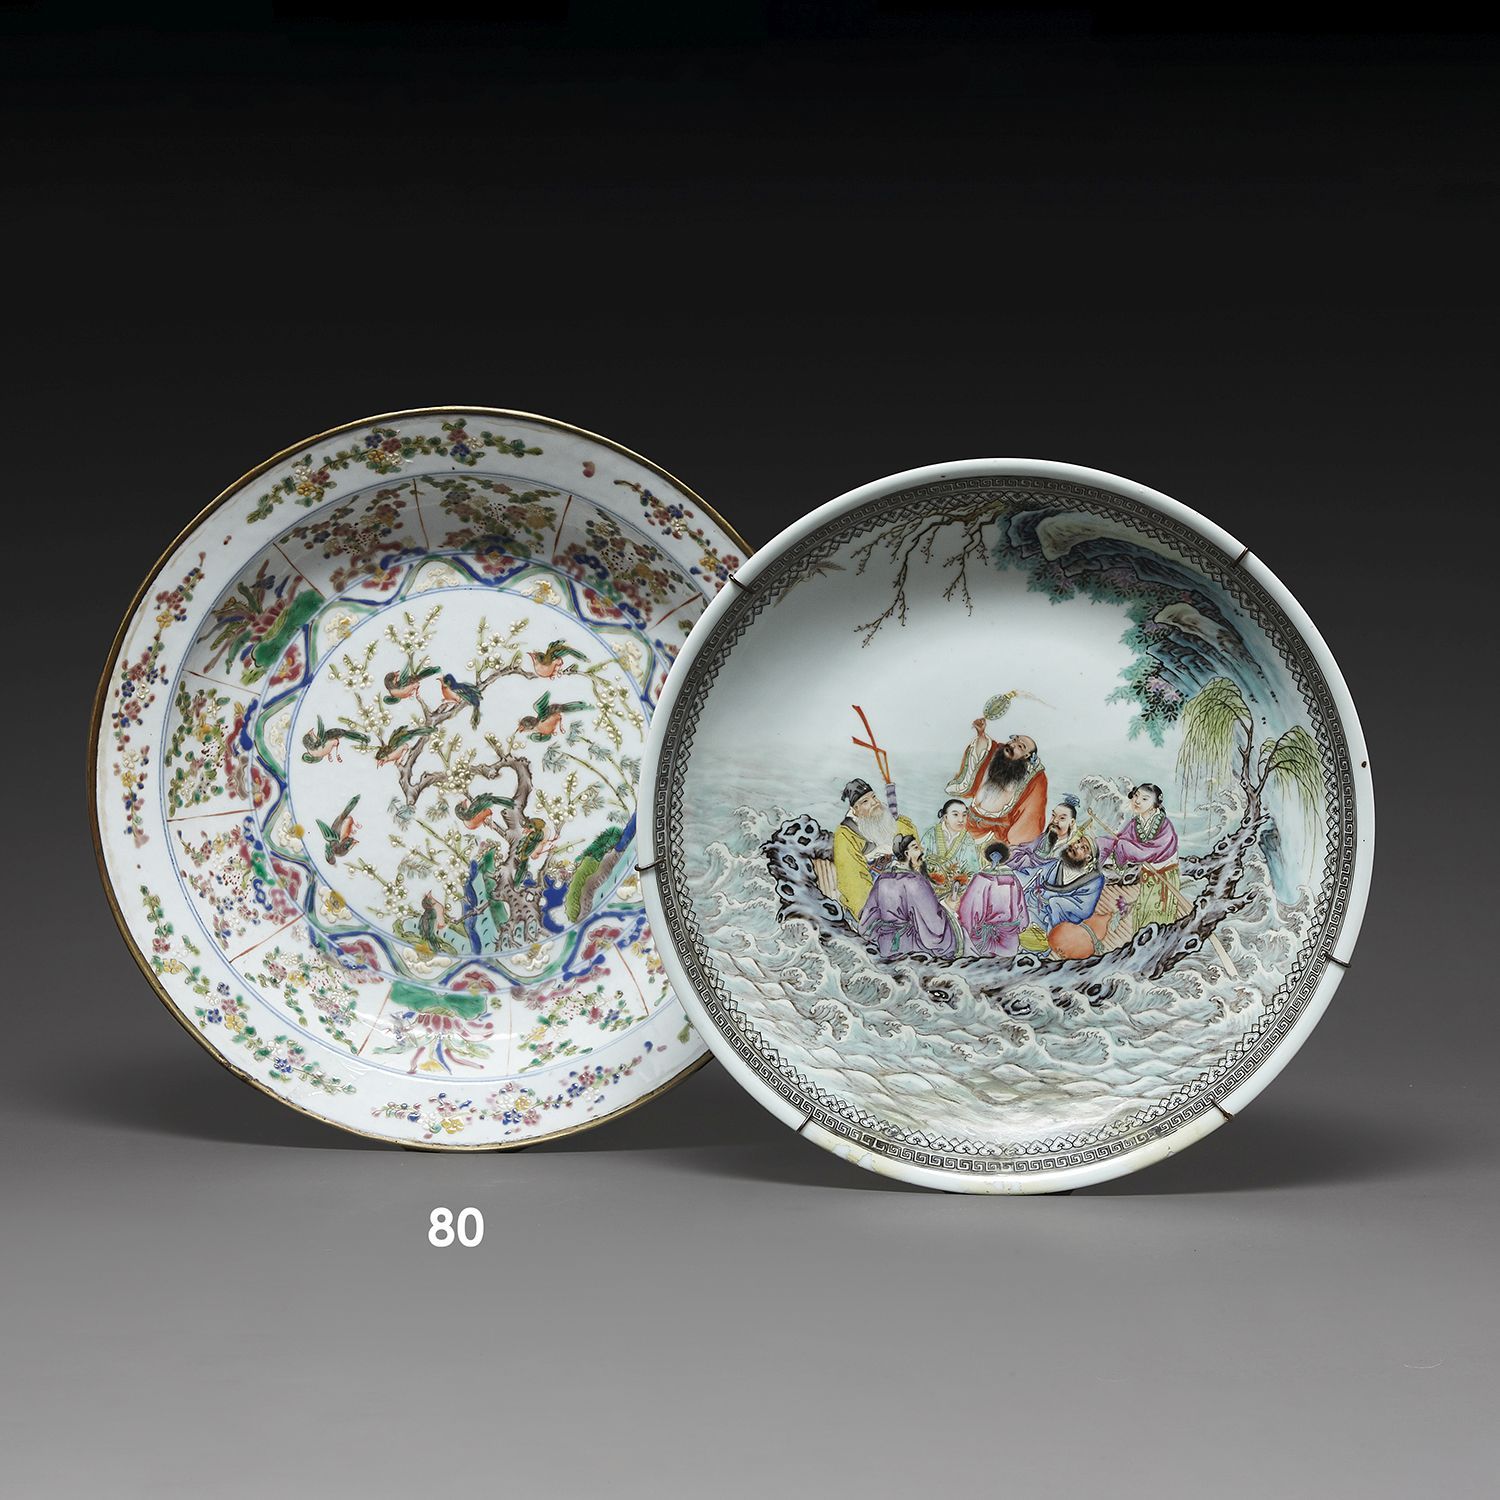 Null LARGE ROUND PLAT
in porcelain and polychrome enamels in the style of the pi&hellip;